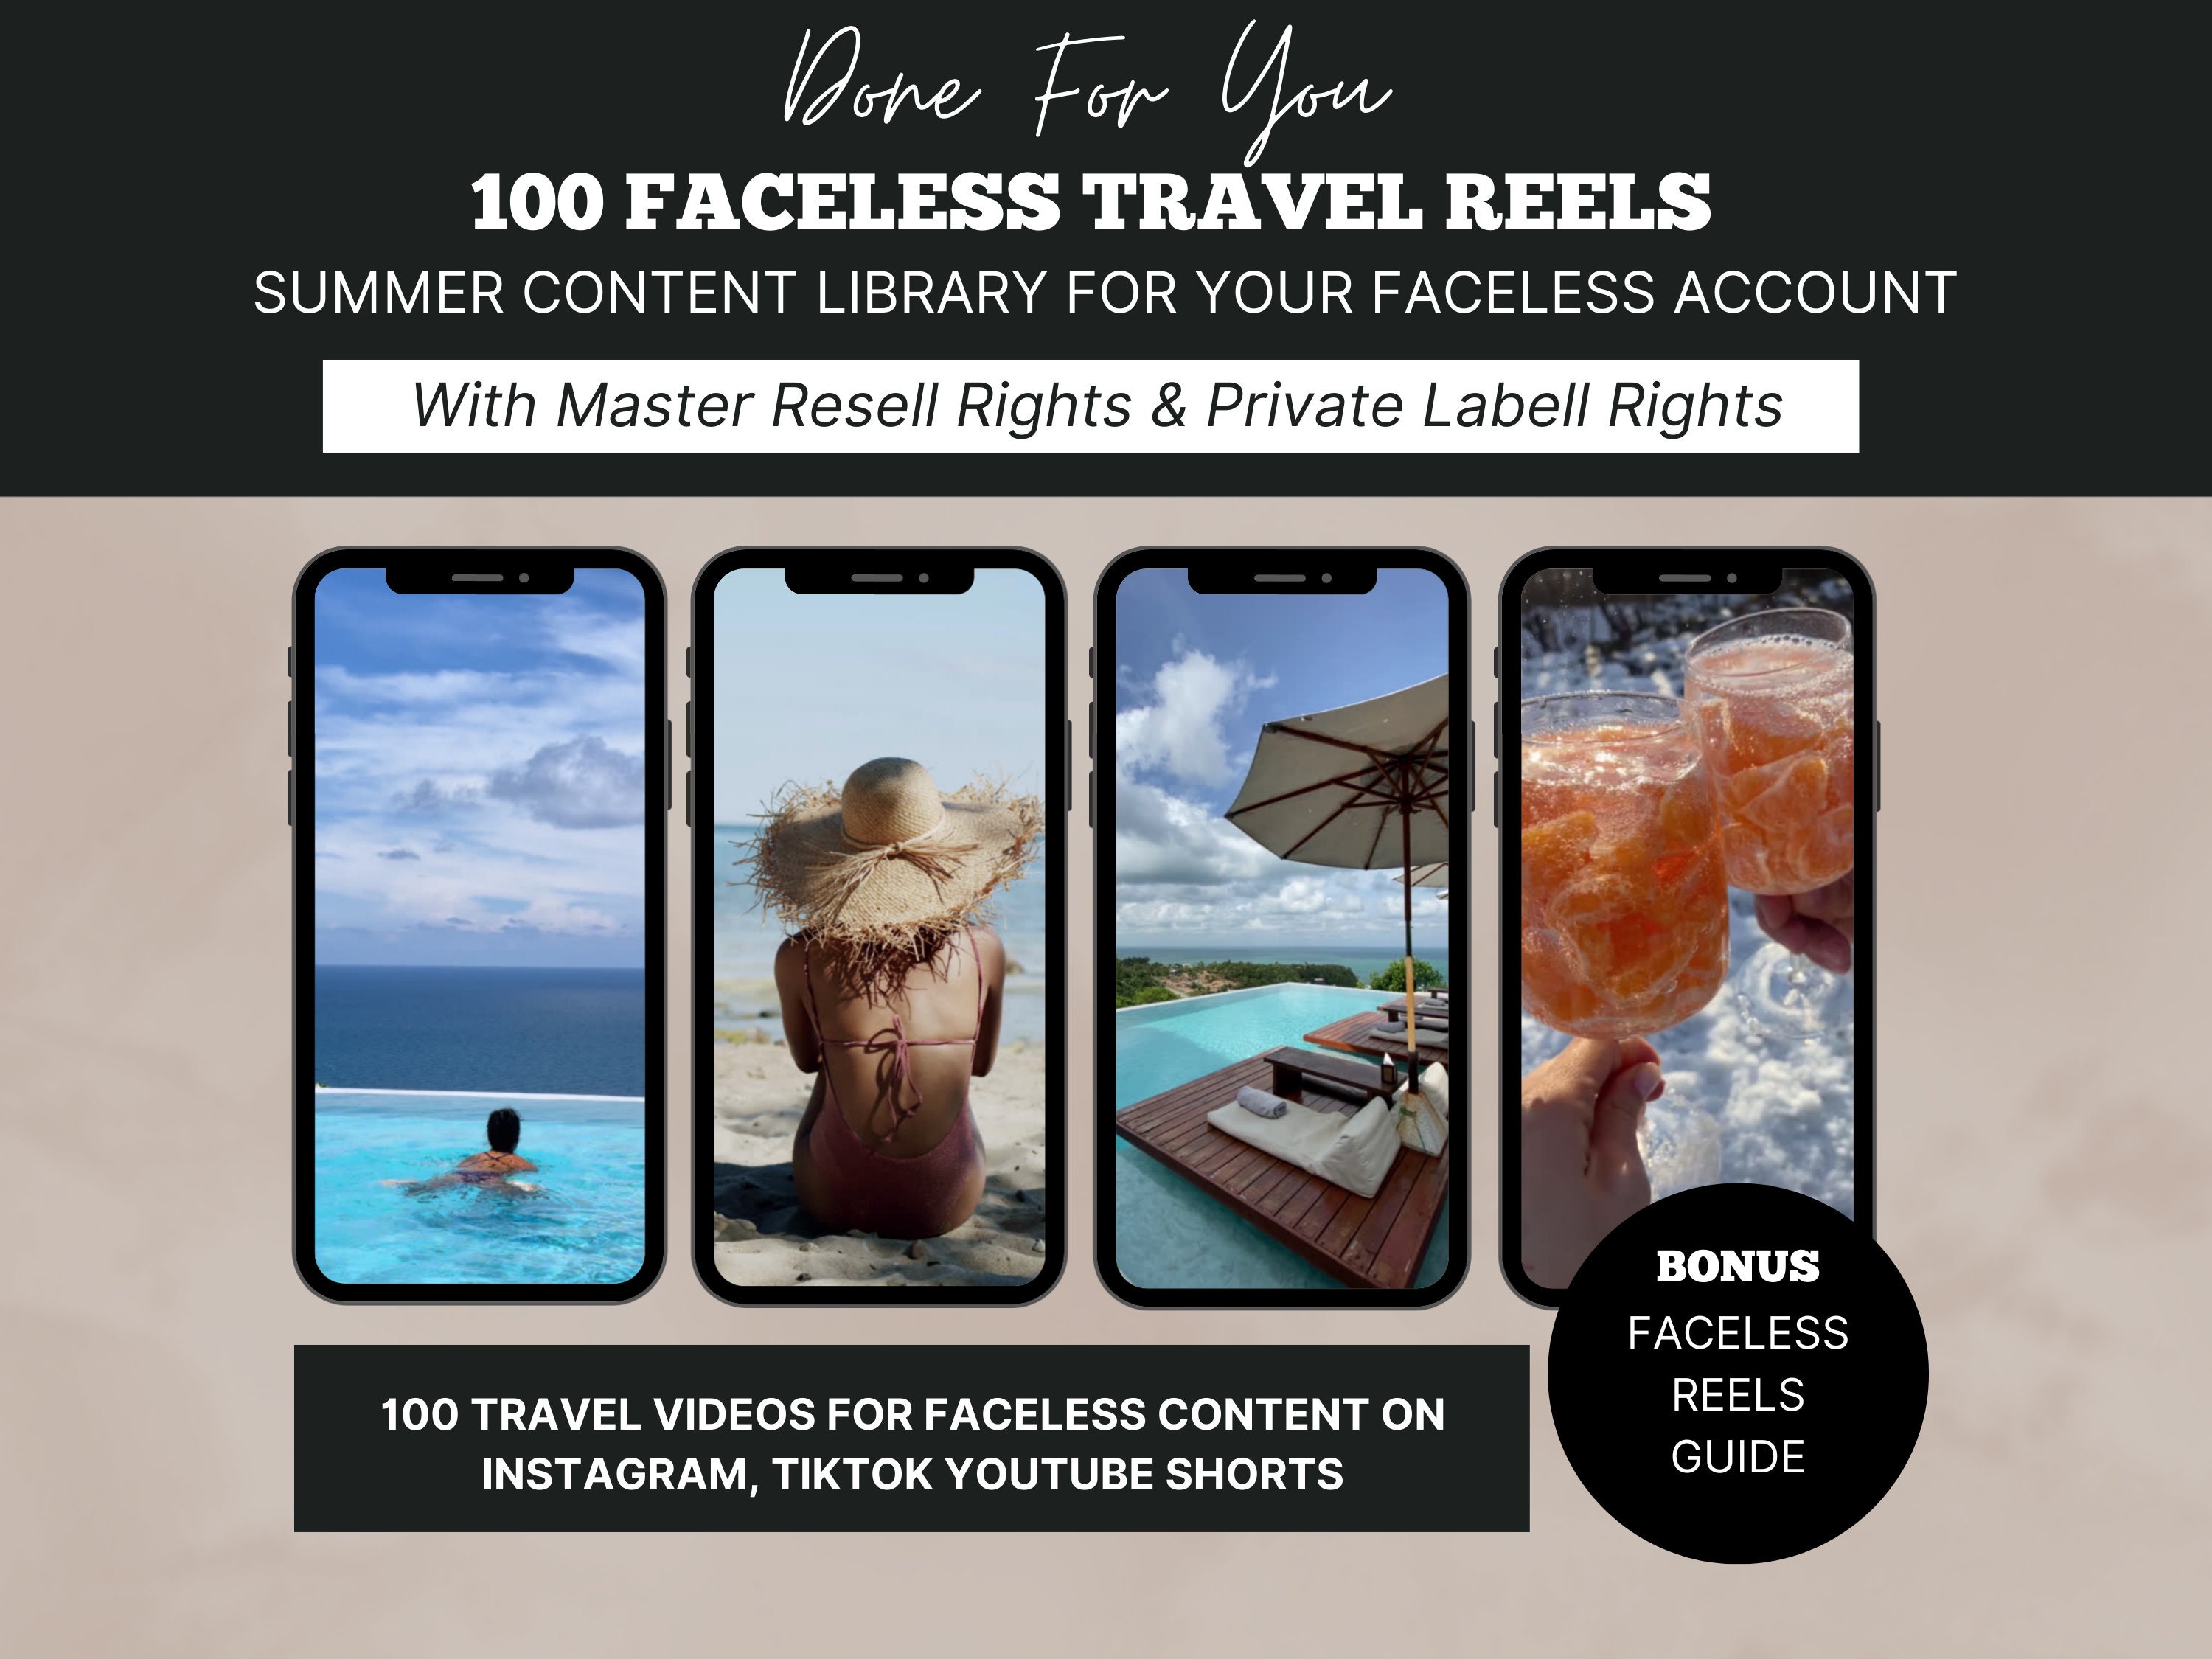 Faceless Social Media Stock Videos, Summer Vacation Instagram Reels with  Master Resell Rights (MRR) & Private Label Rights (PLR)